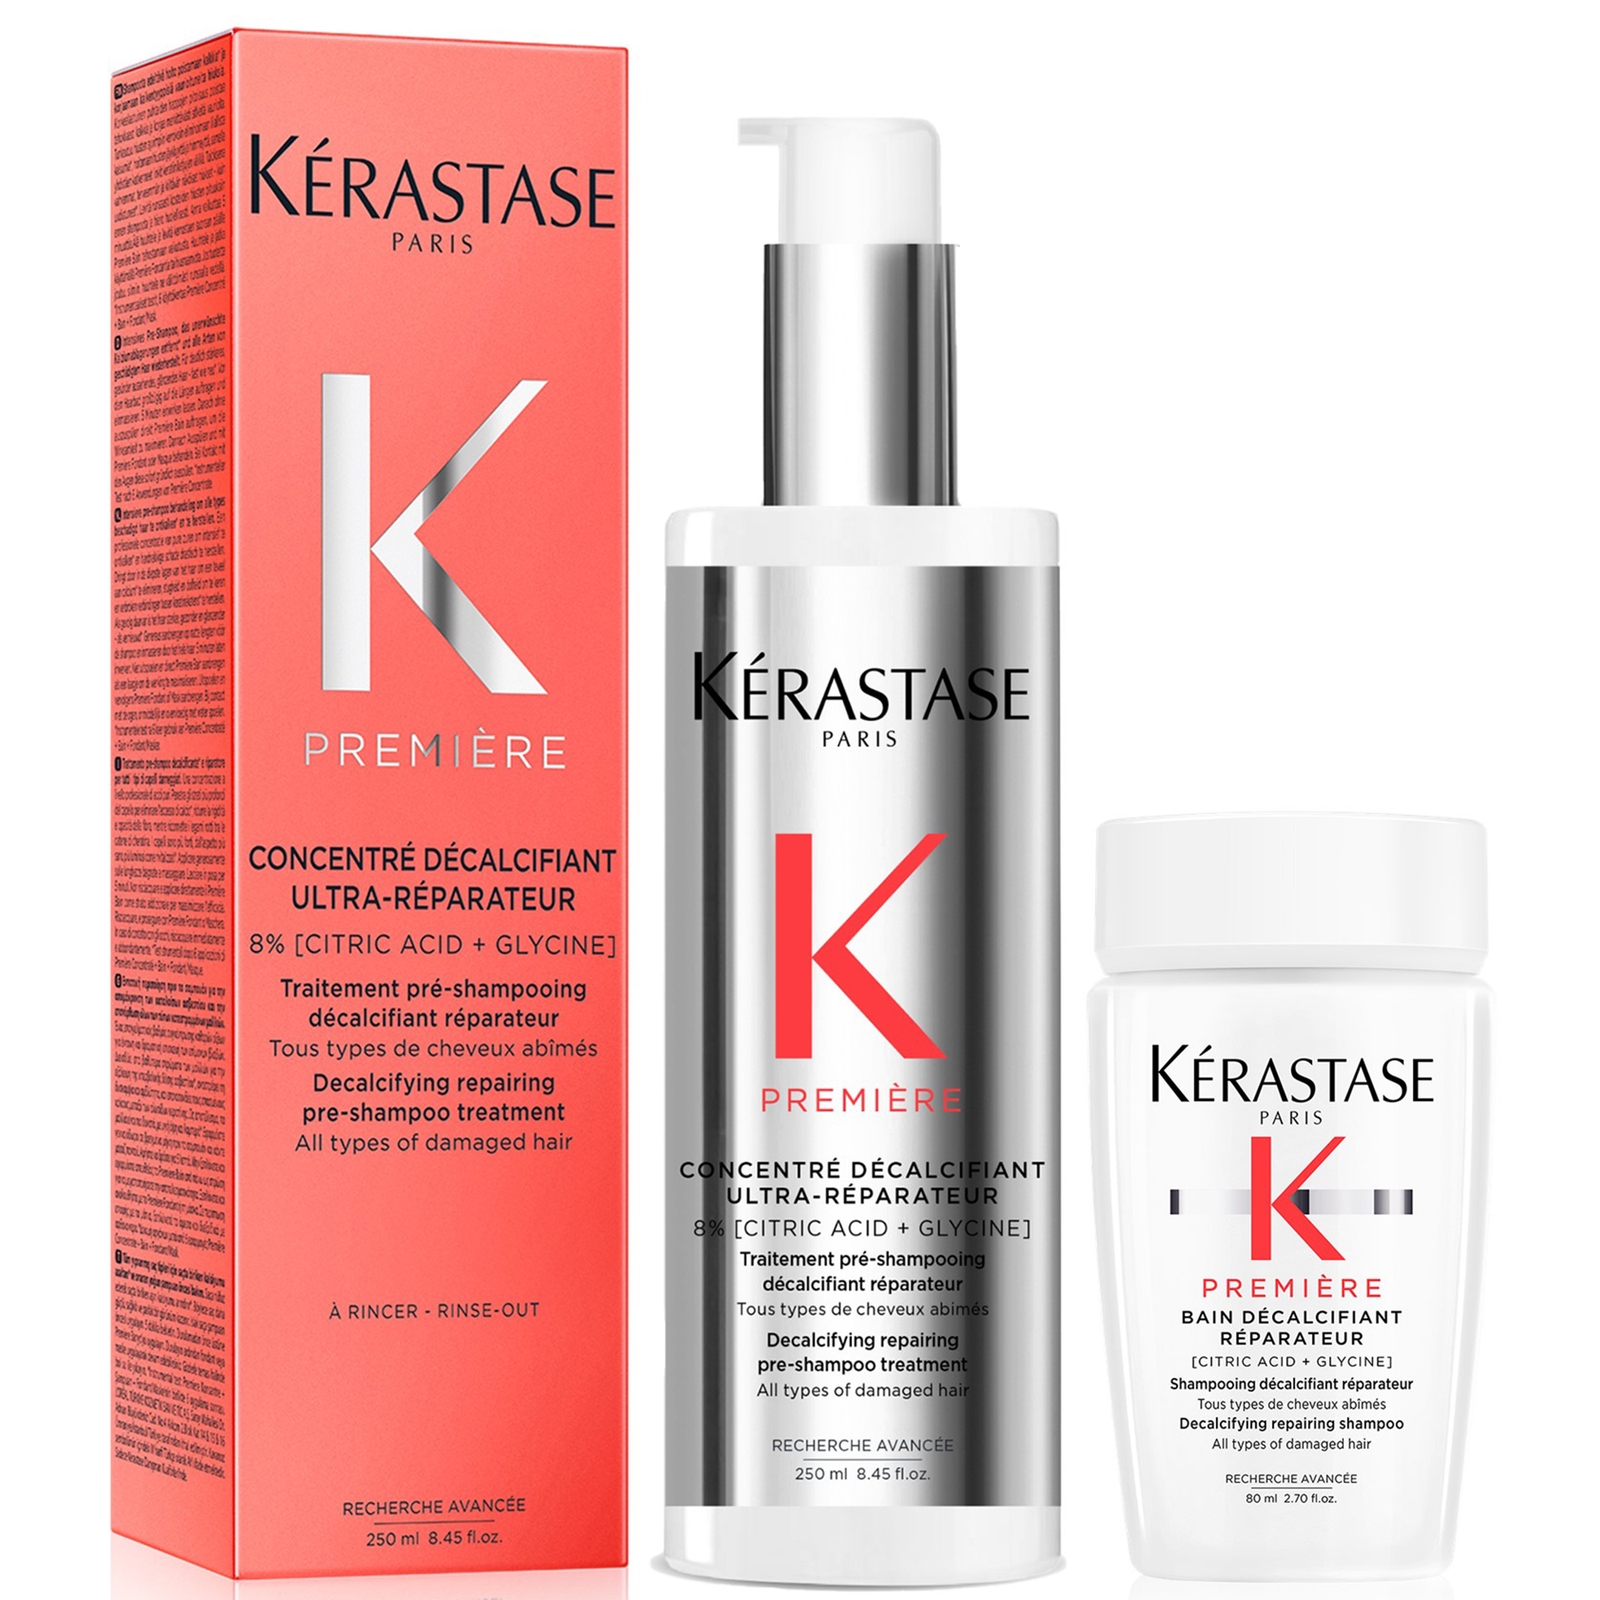 Kerastase Premiere Decalcifying Pre-Shampoo with Travel Size Shampoo for Damaged Hair with Pure Citr